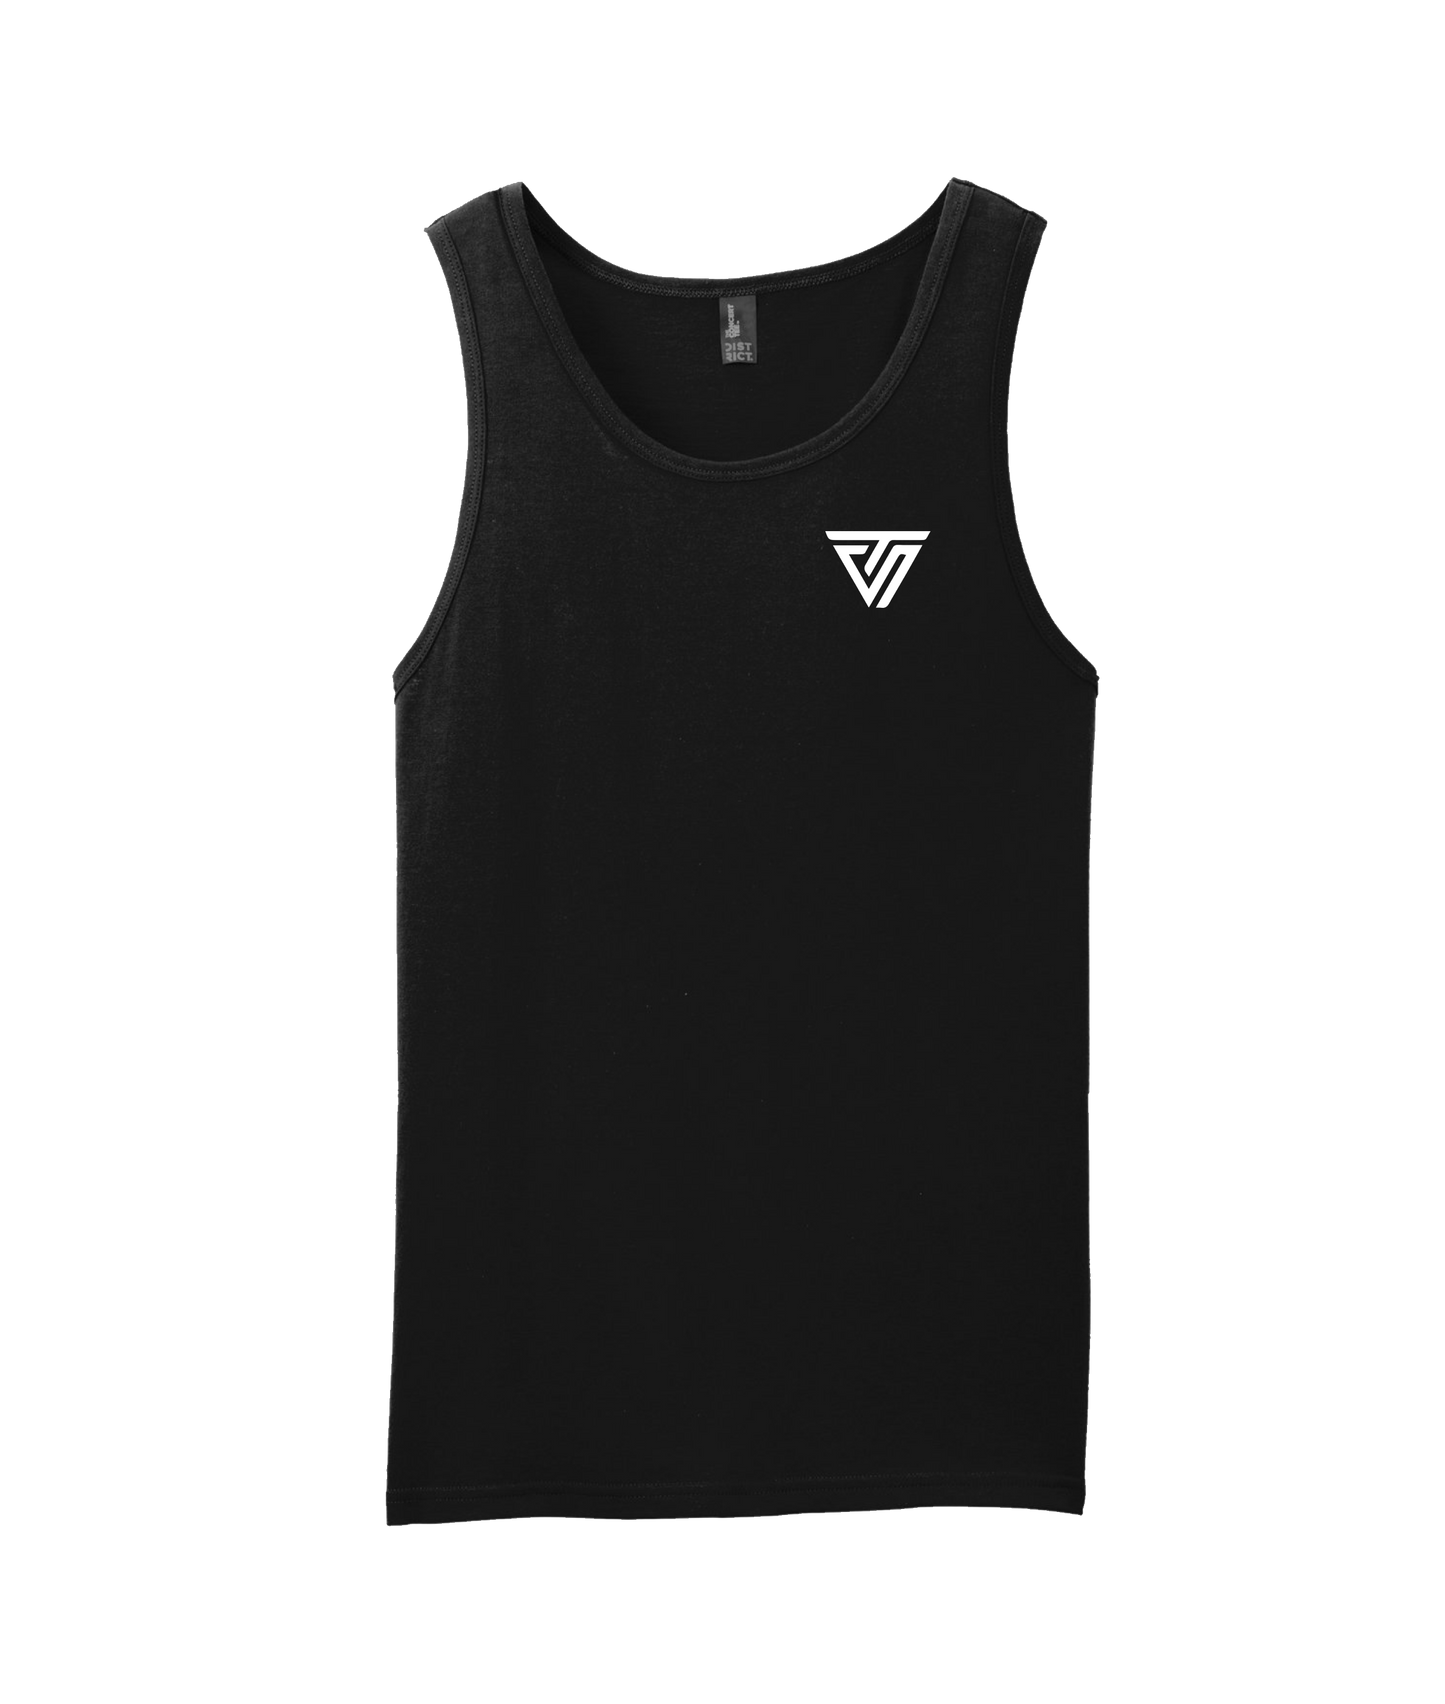 TheShift - The Triangle - Black Tank Top